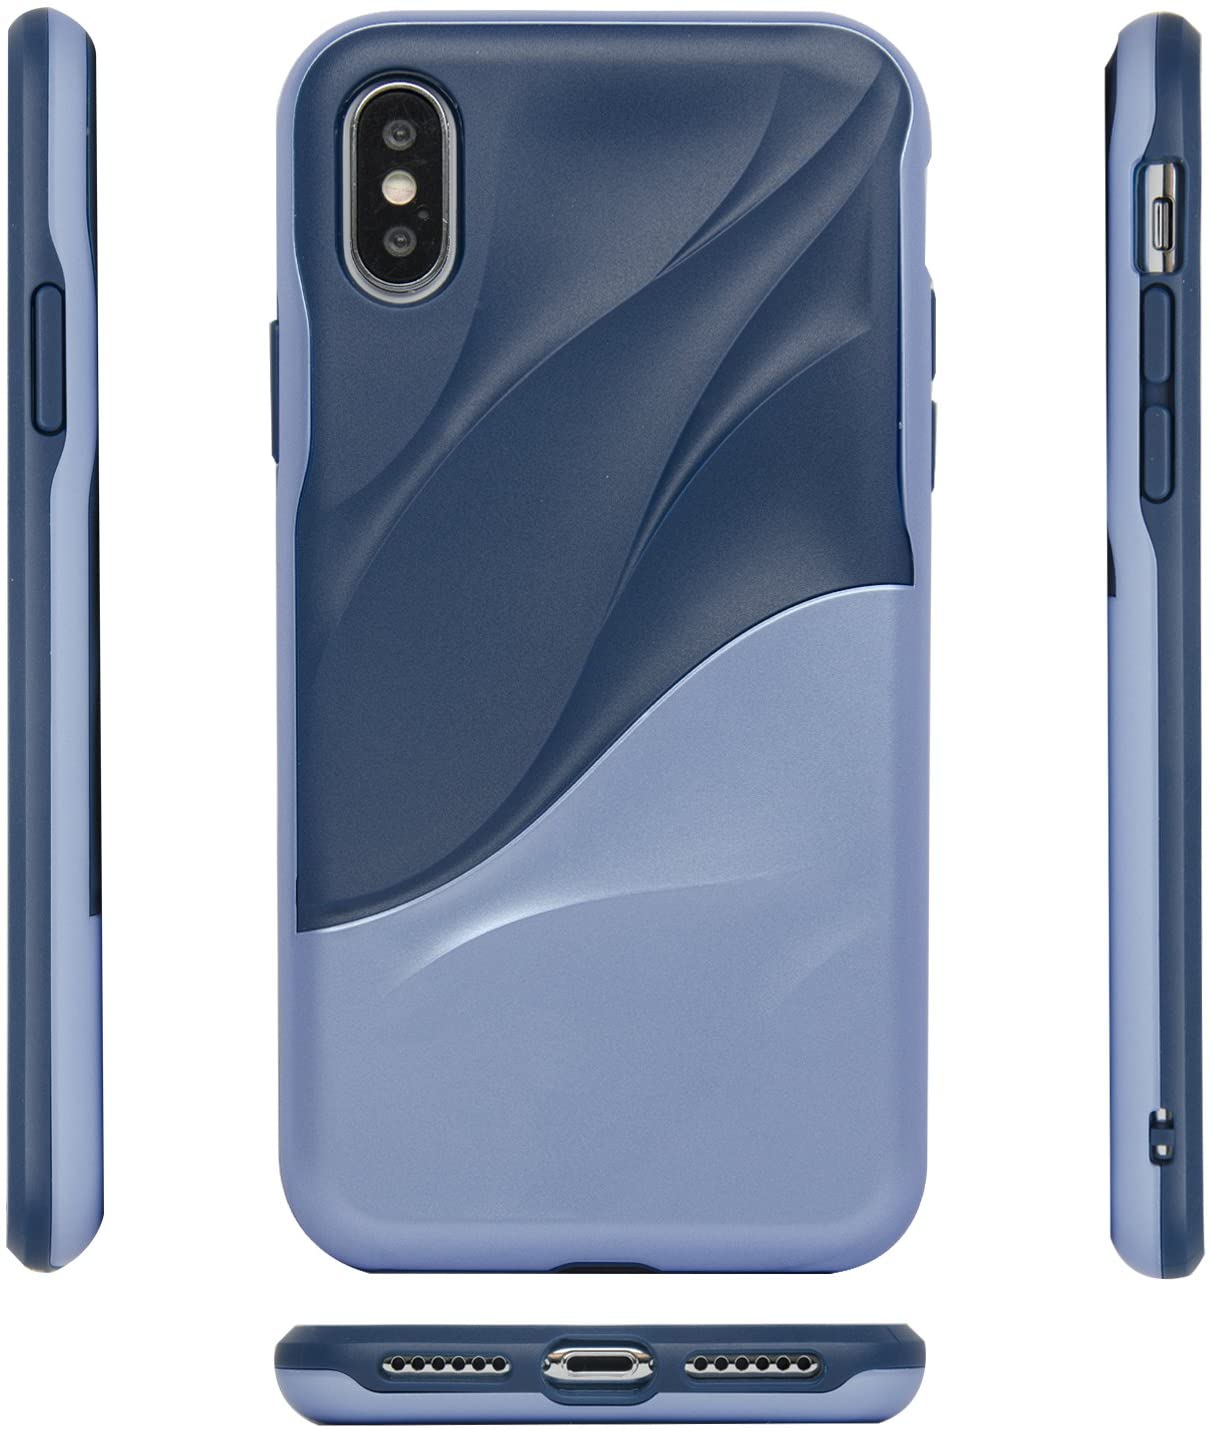 iPhone X Case iPhone X/ Xs protective case - e4cents